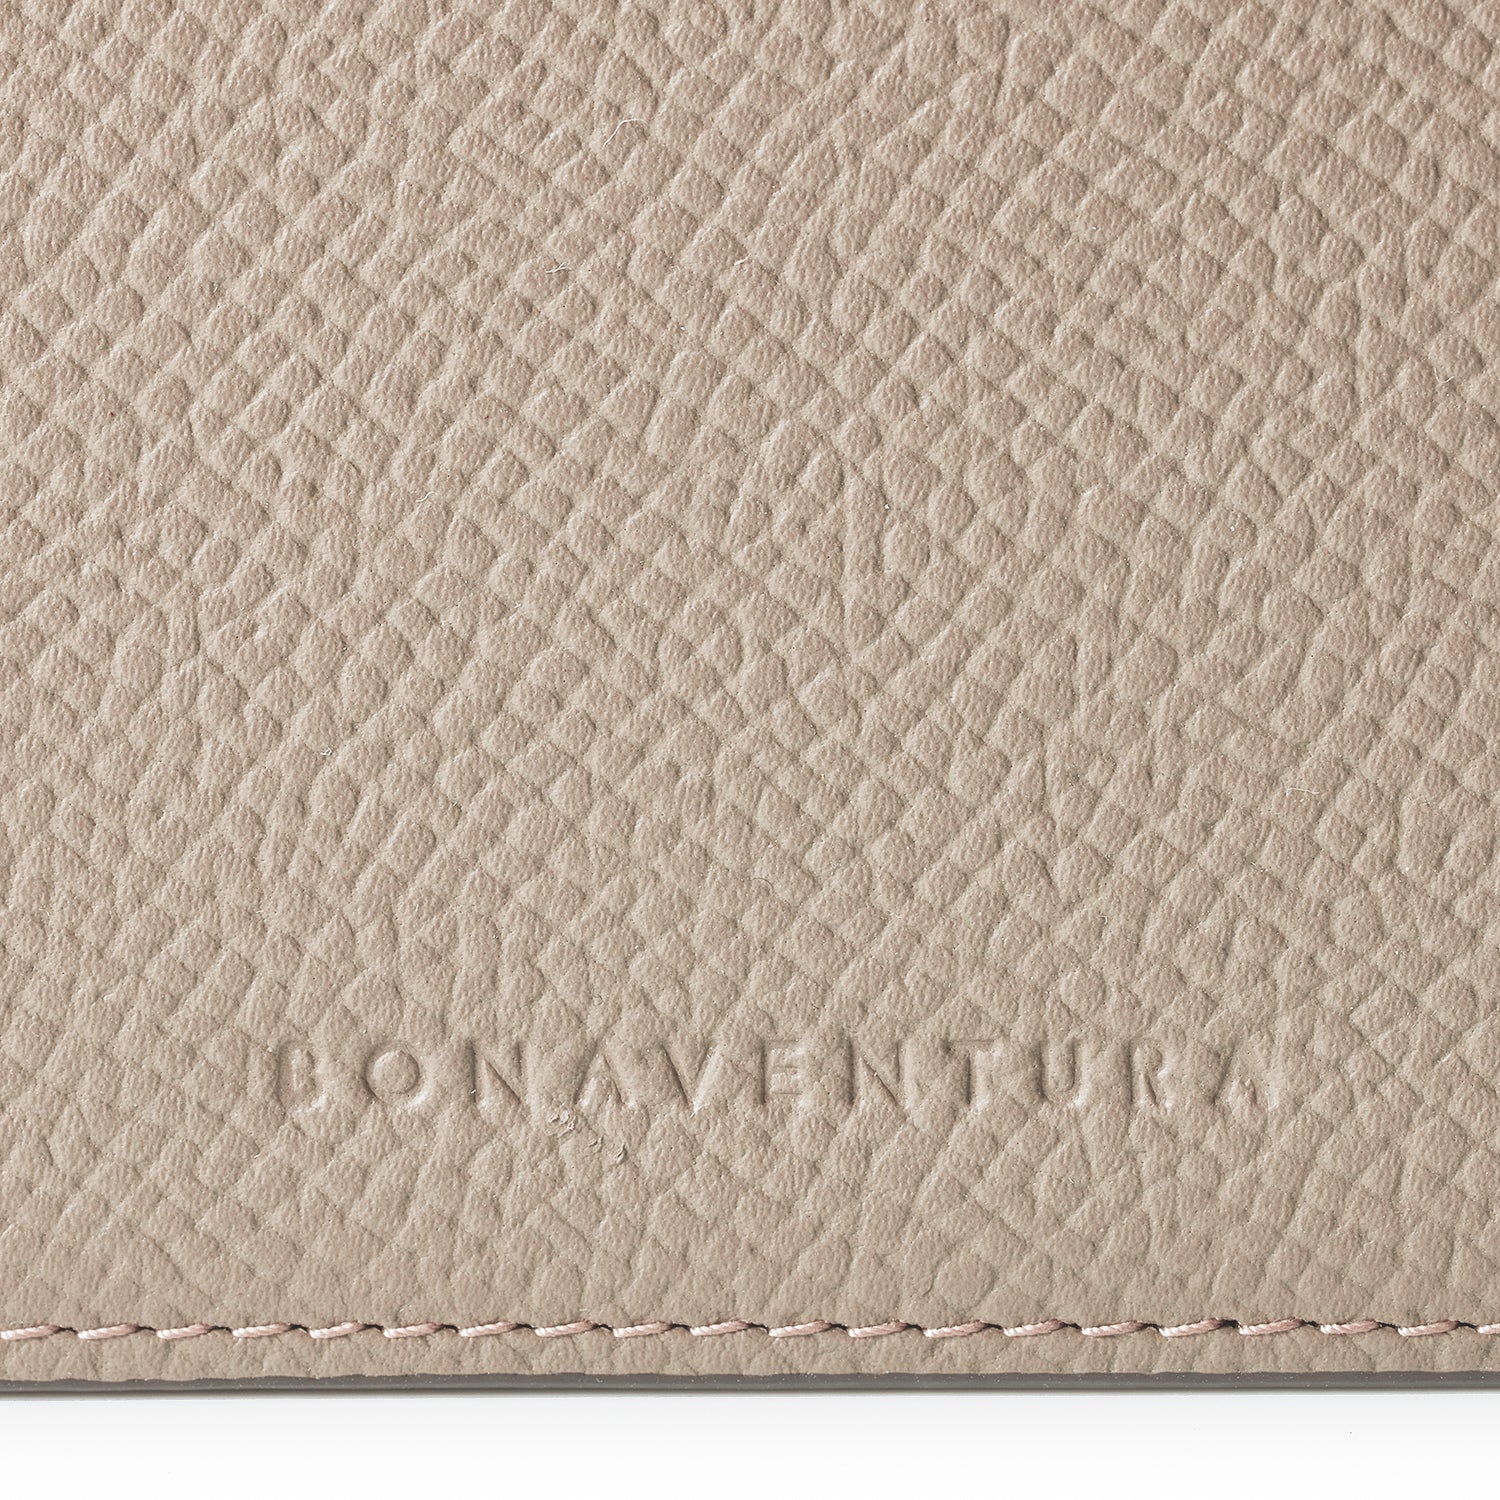 Men's bifold wallet in Noblesse and embossed crocodile leather